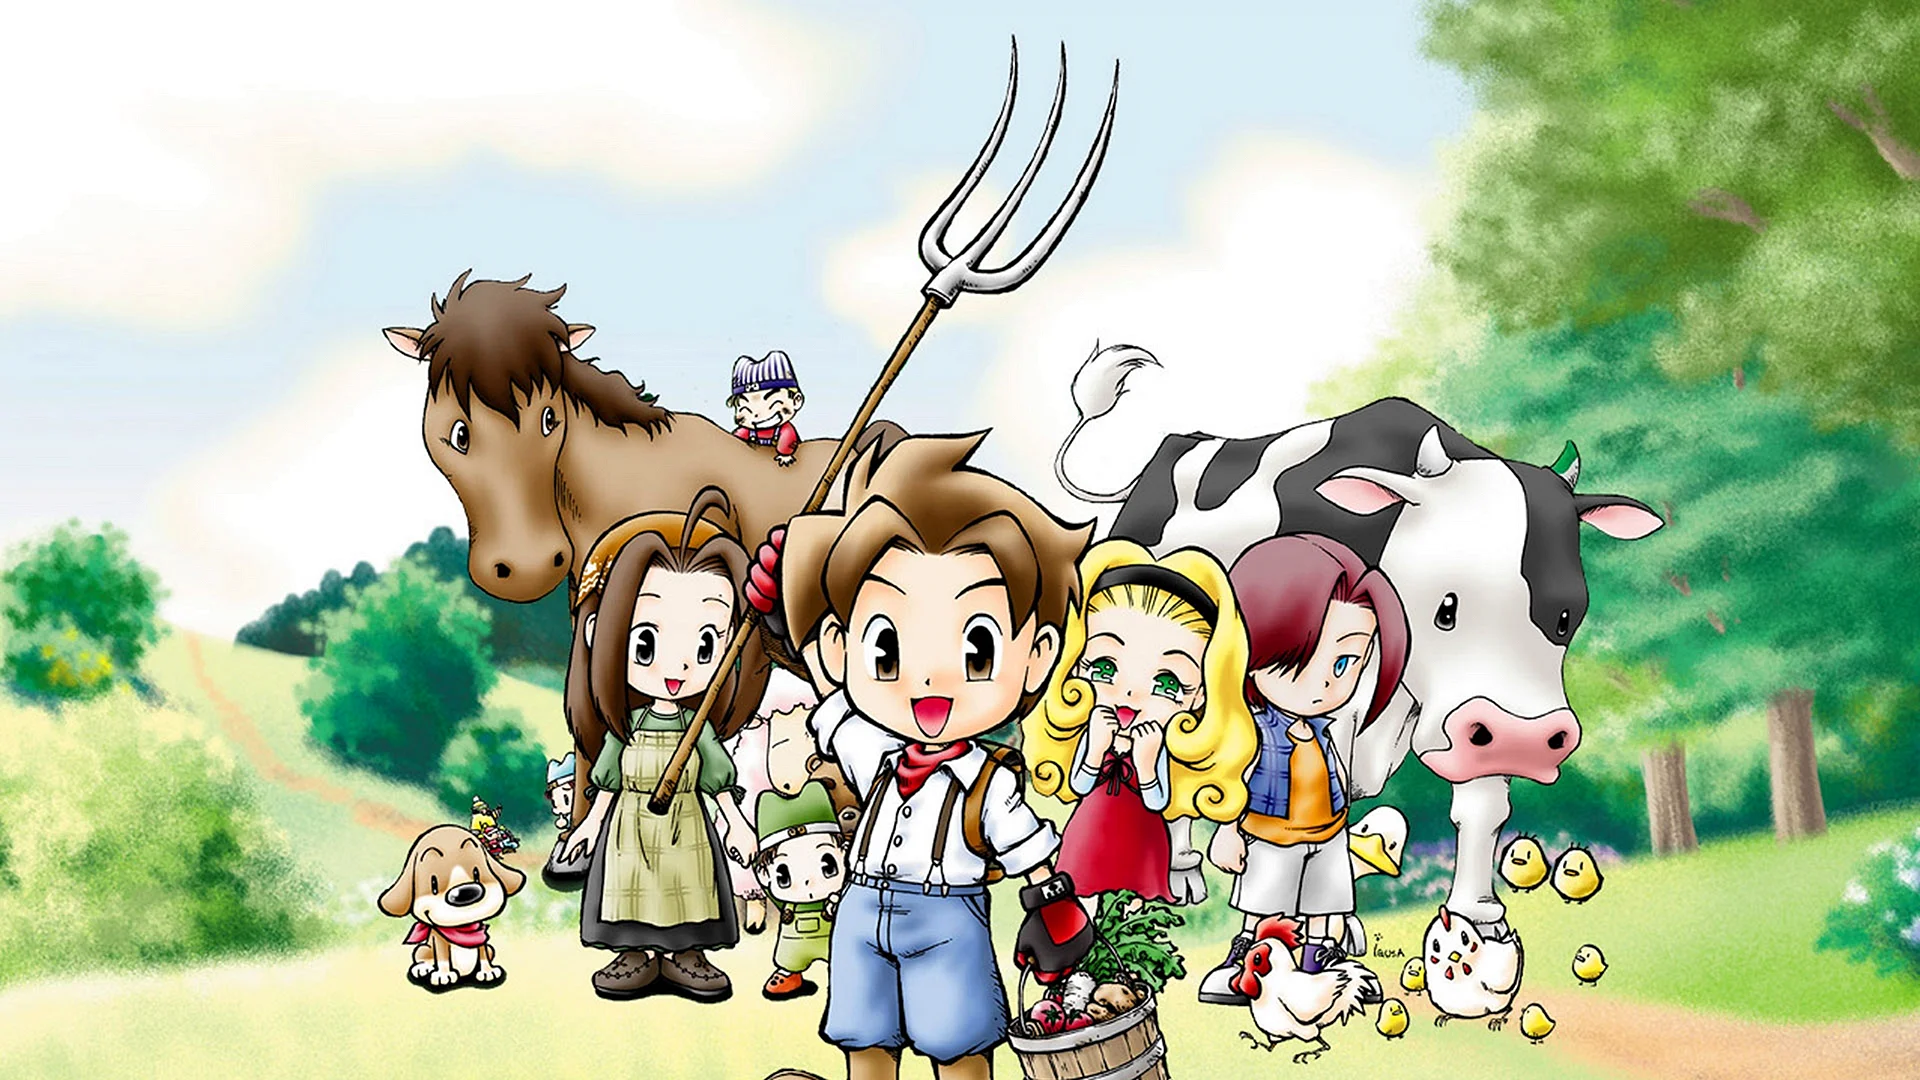 Harvest Moon Friend Of Mineral Town Wallpaper